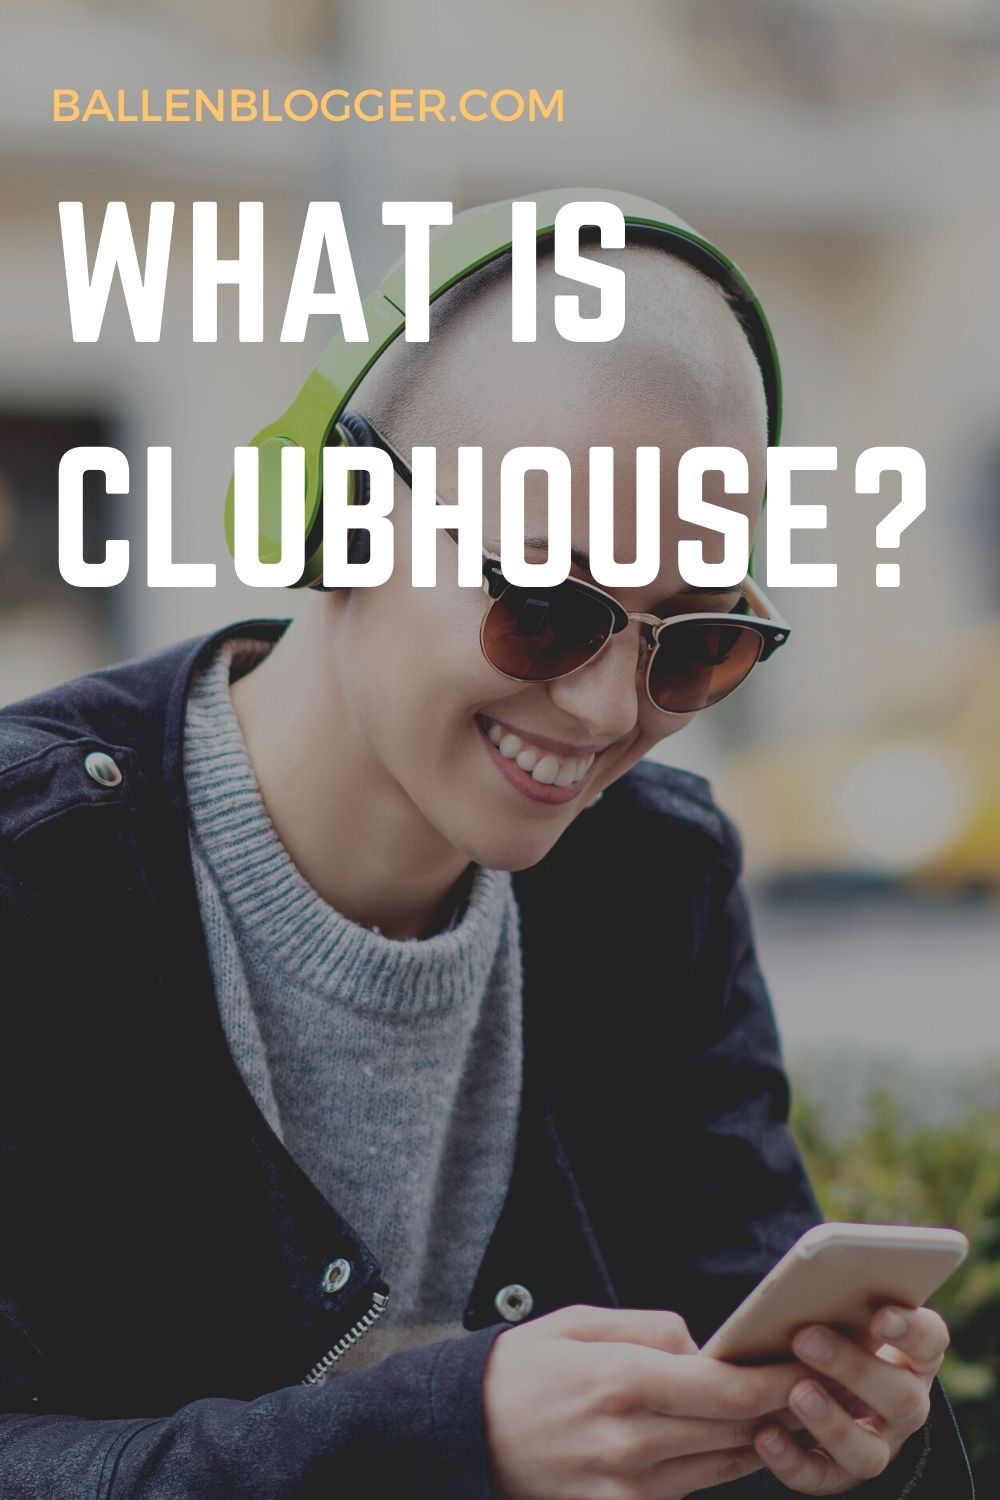 This article goes over the new Clubhouse Social Media app. Read the article to find information about how it works and the benefits of signing up.